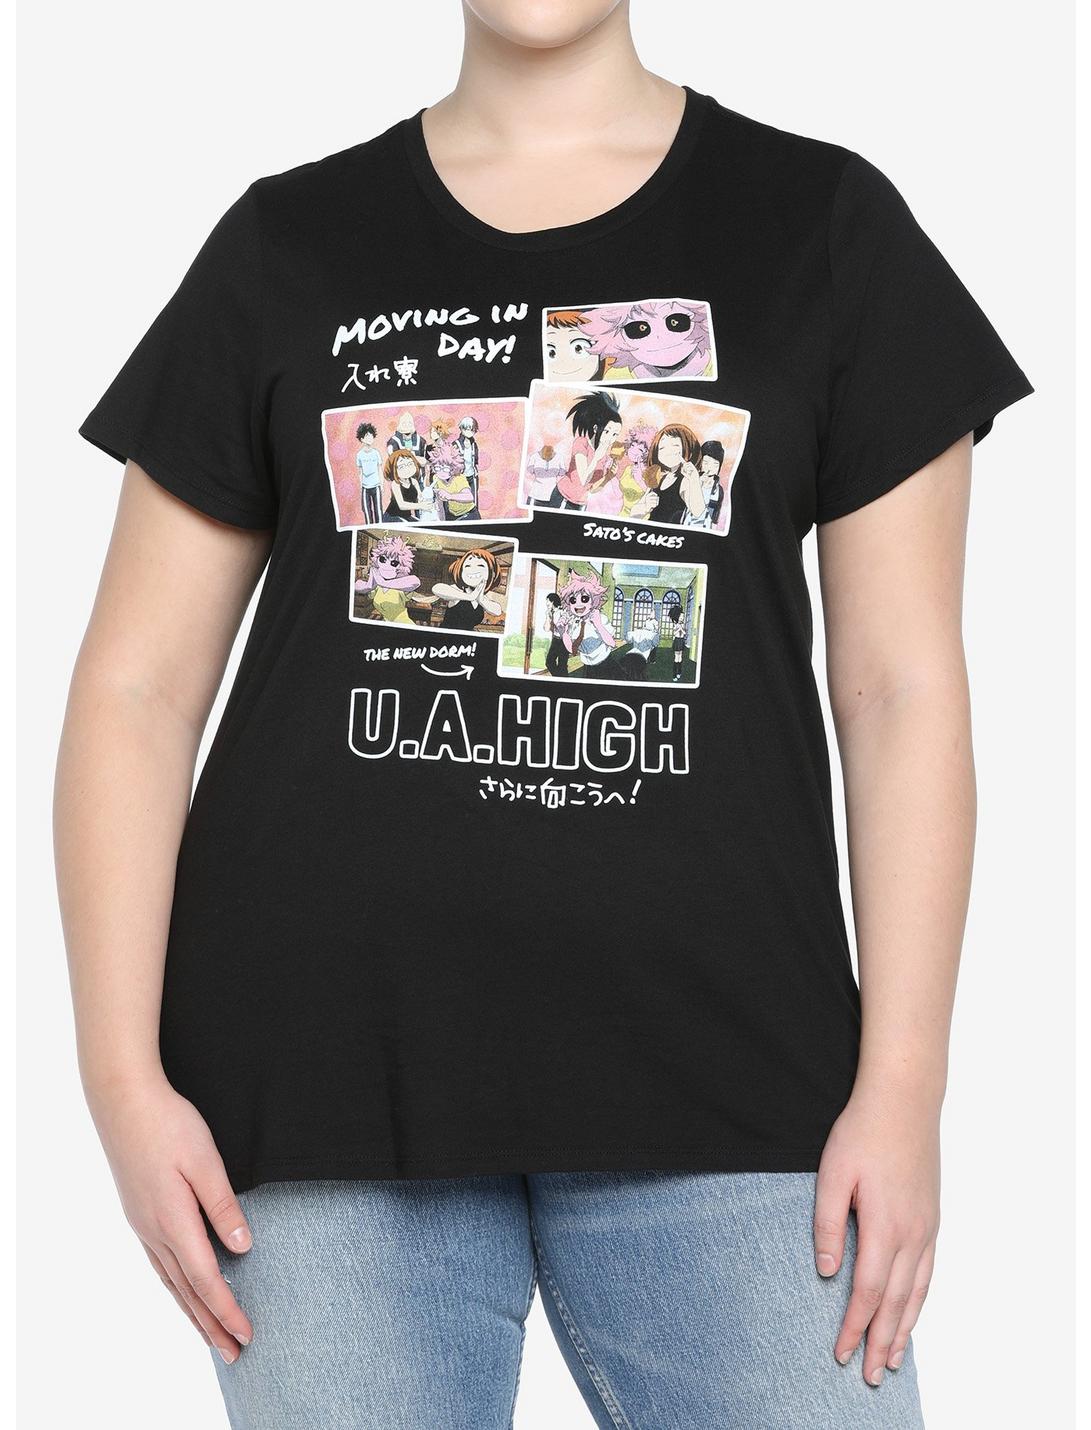 My Hero Academia Moving In Day Photos Girls T-Shirt Plus Size, MULTI, hi-res